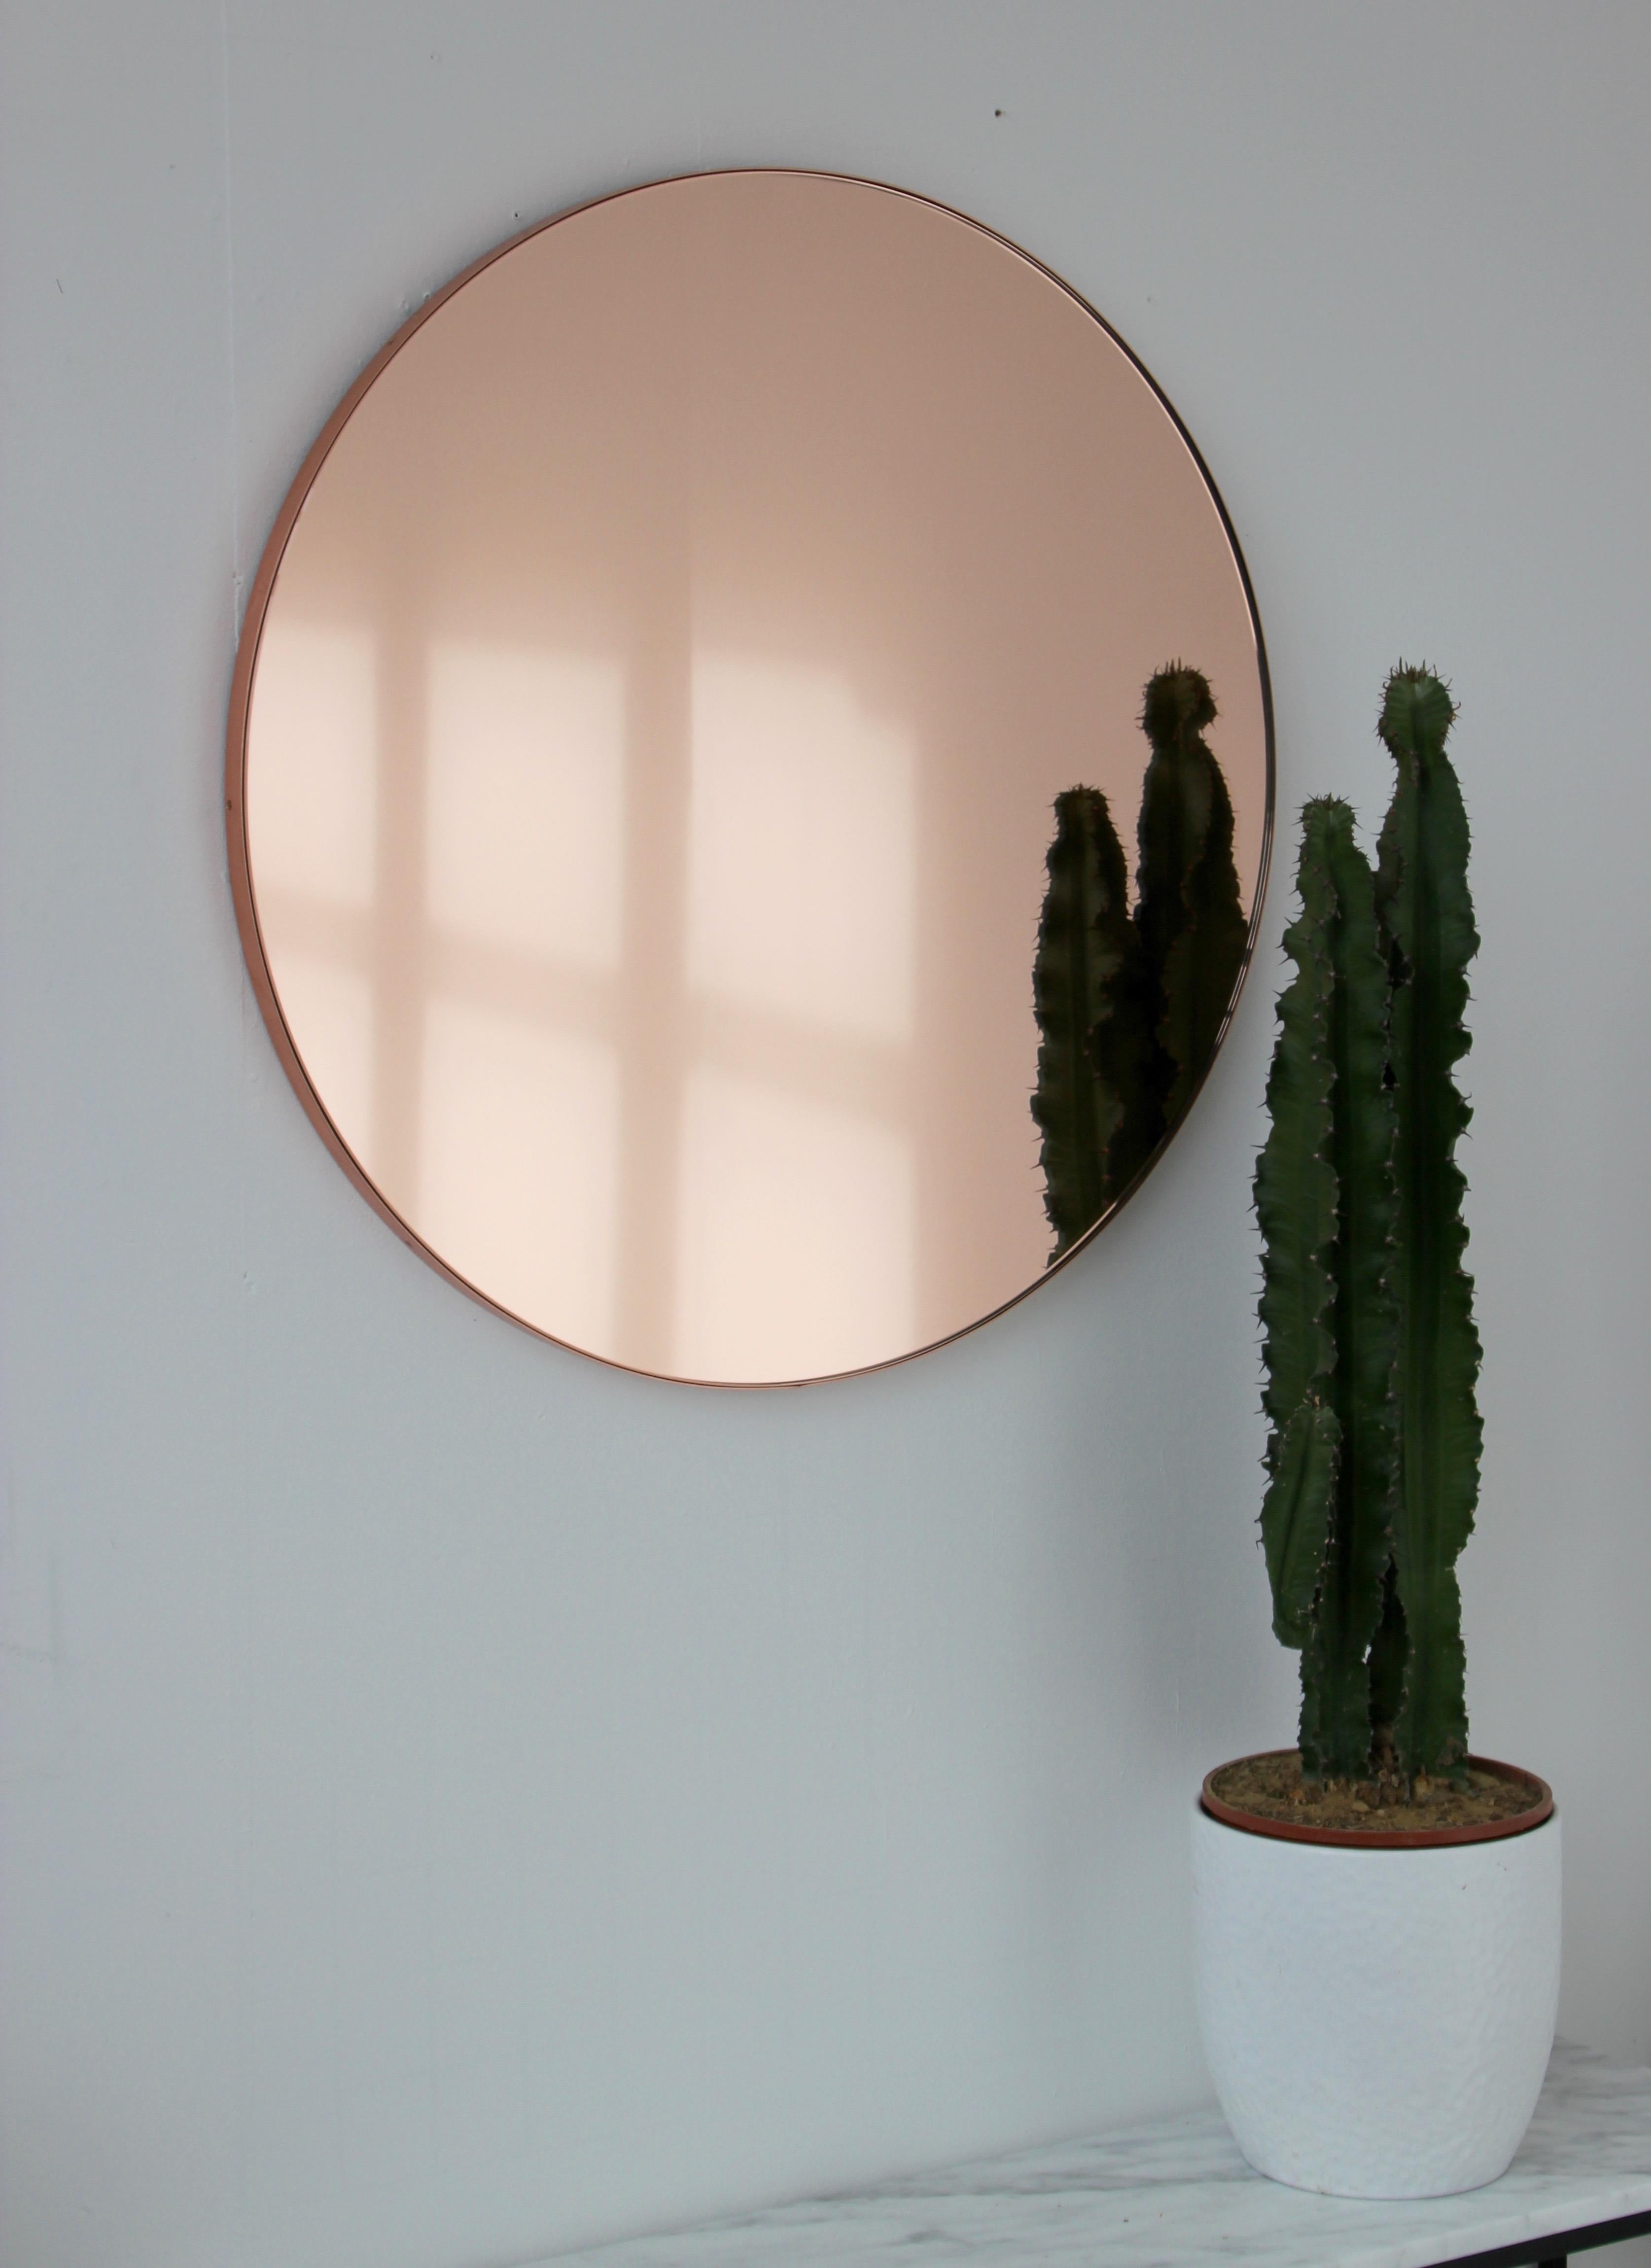 Contemporary rose gold / peach tinted round mirror with an elegant brushed copper frame. The detailing and finish, including visible copper plated screws, emphasize the crafty and quality feel of the mirror, a true signature of our brand. Designed